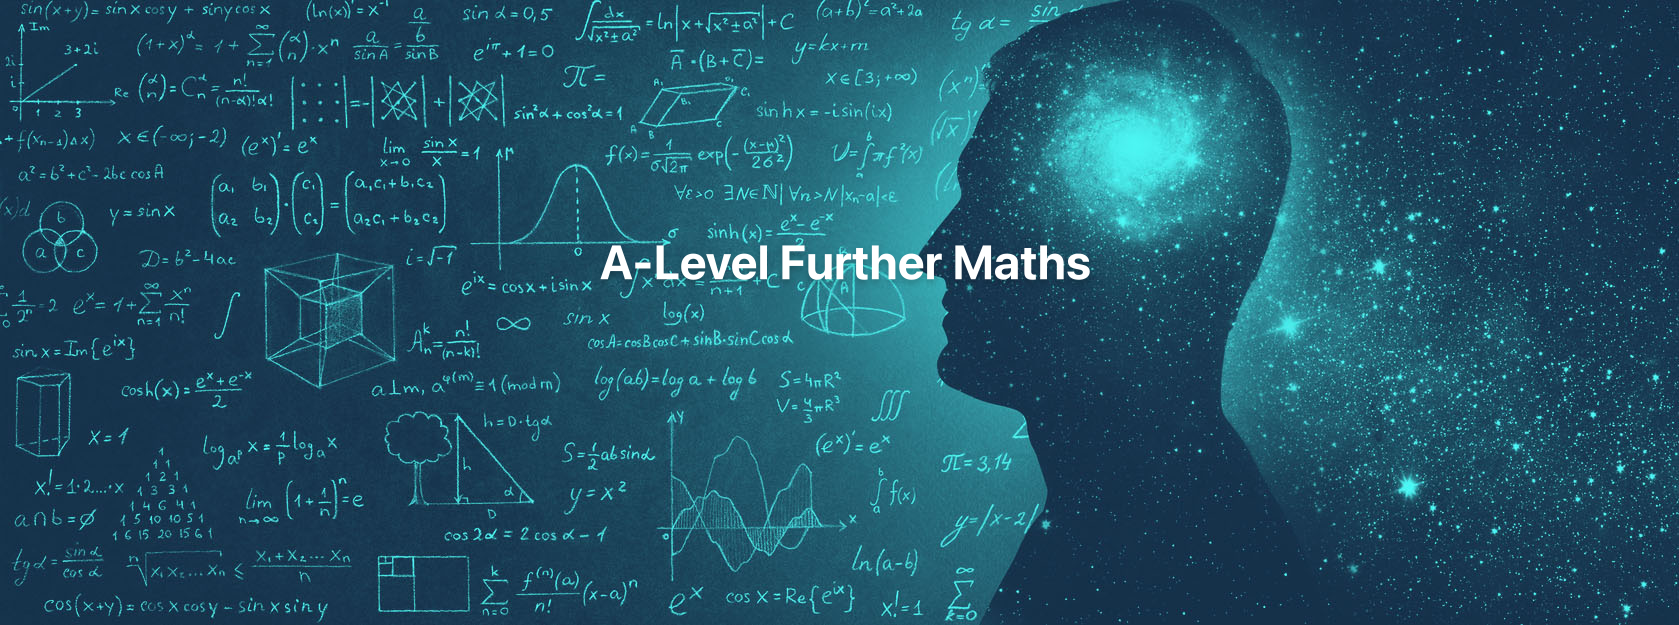 A-Level Further Maths Distance Learning Course by Oxbridge